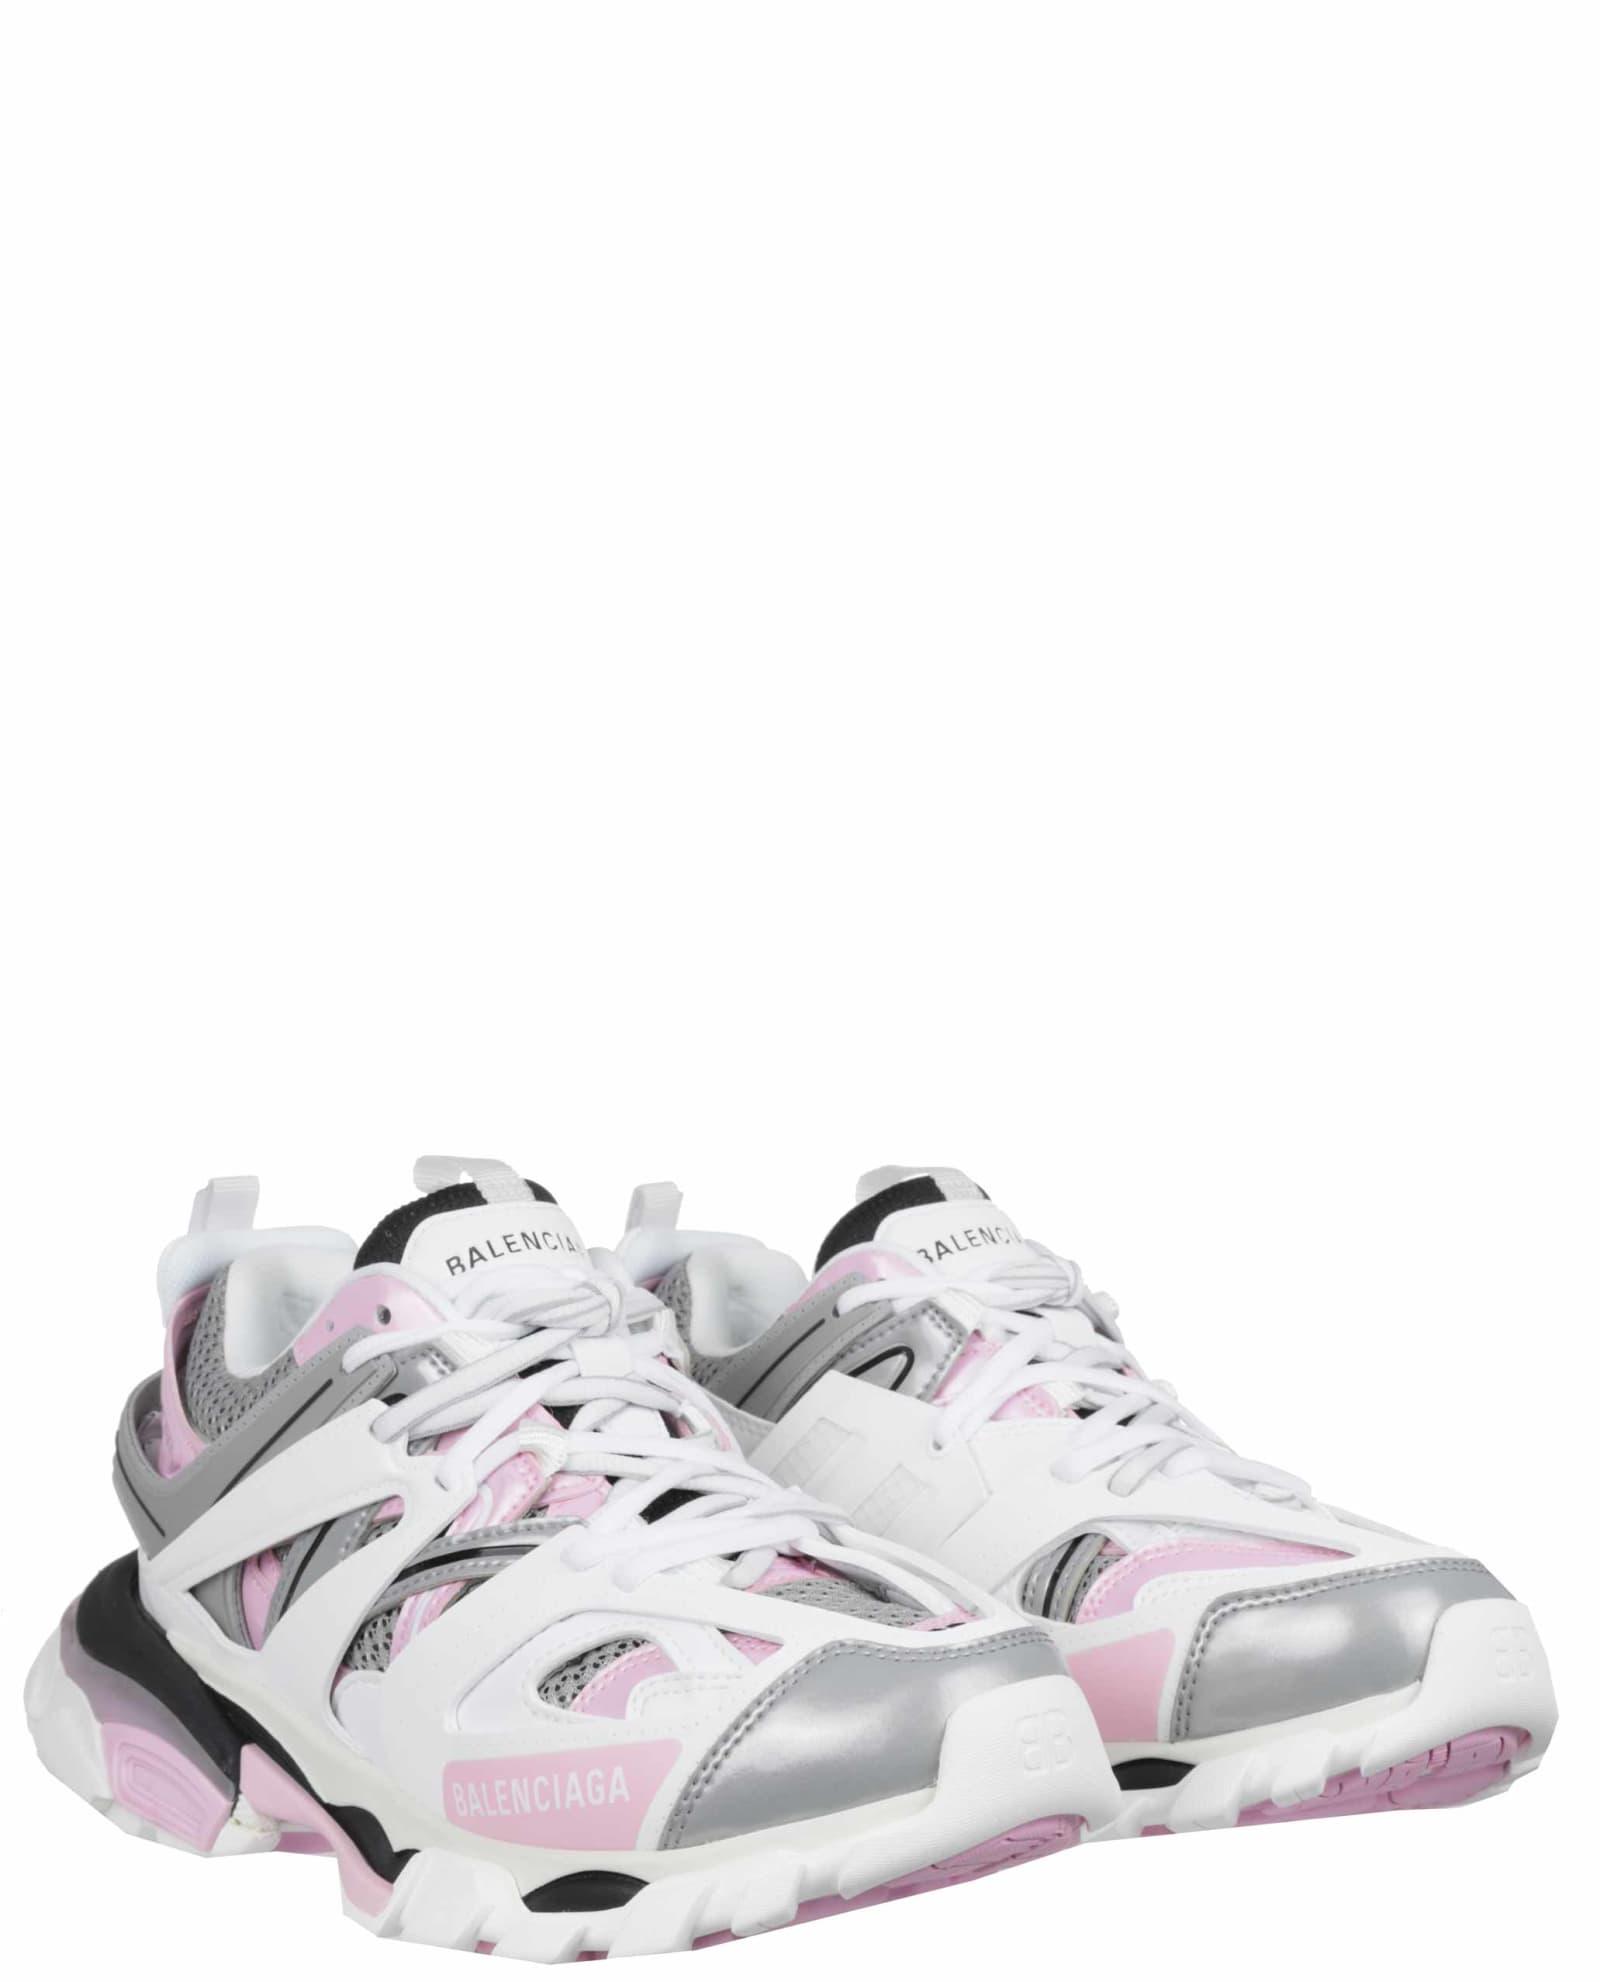 Balenciaga White, Pink And Grey Track Sneakers | Lyst